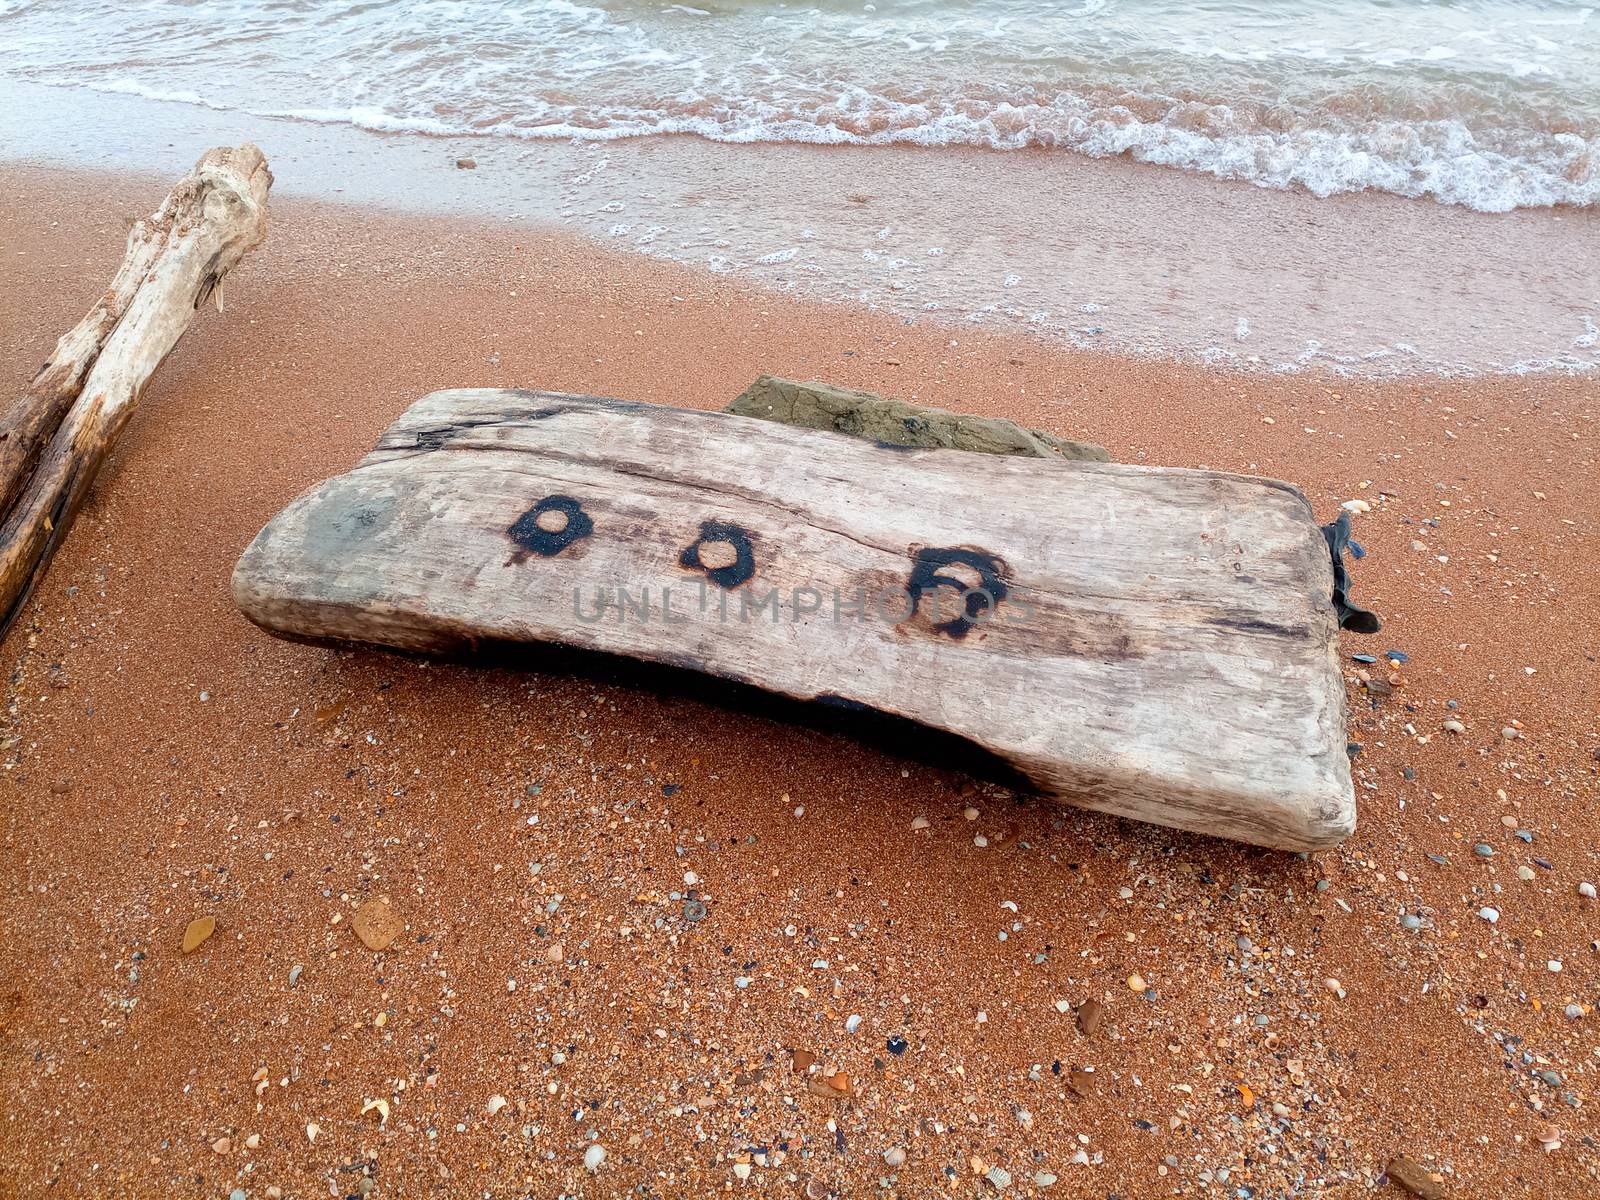 A large wooden log on the beach.